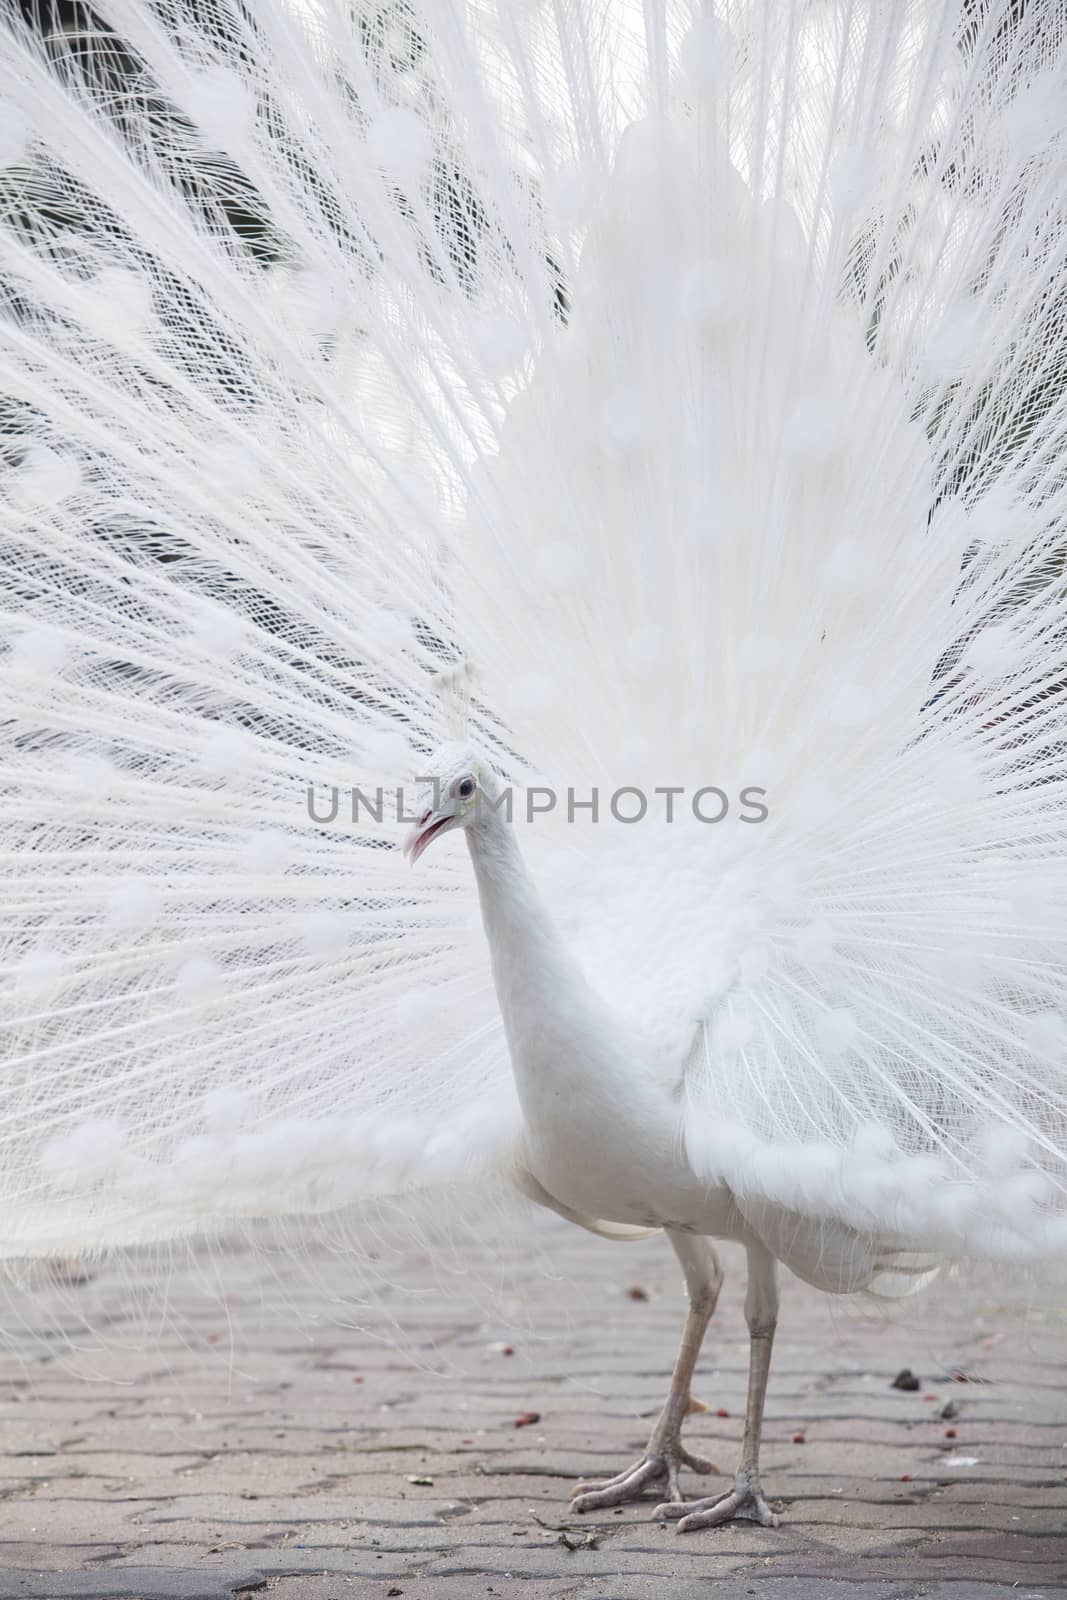 white peacock shows its tail (feather) by jee1999